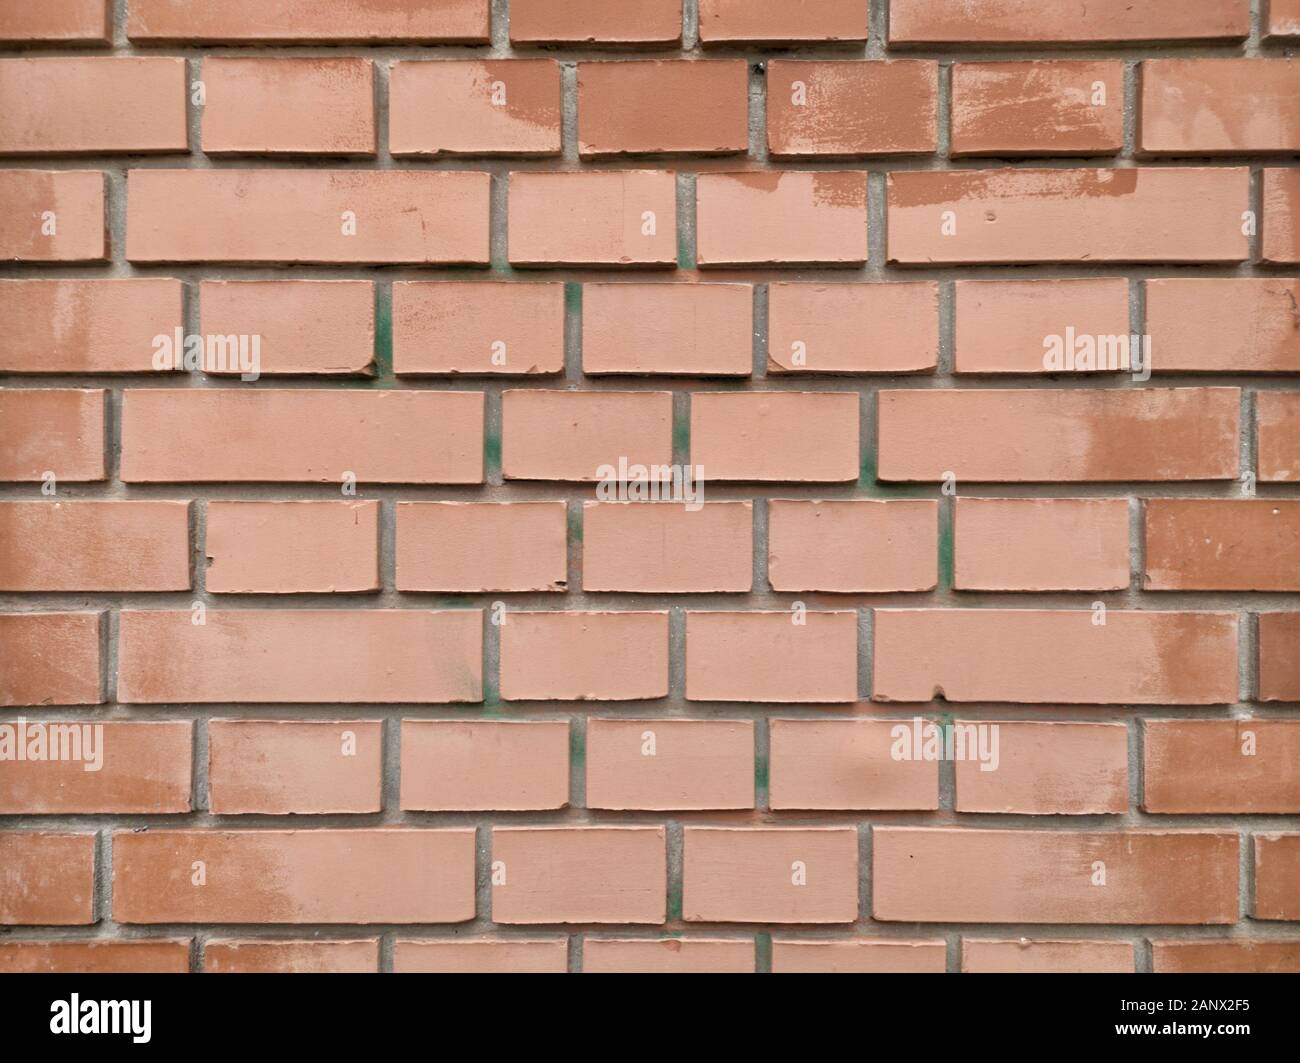 Painted brick wall texture background - regular brick style tiling Stock Photo